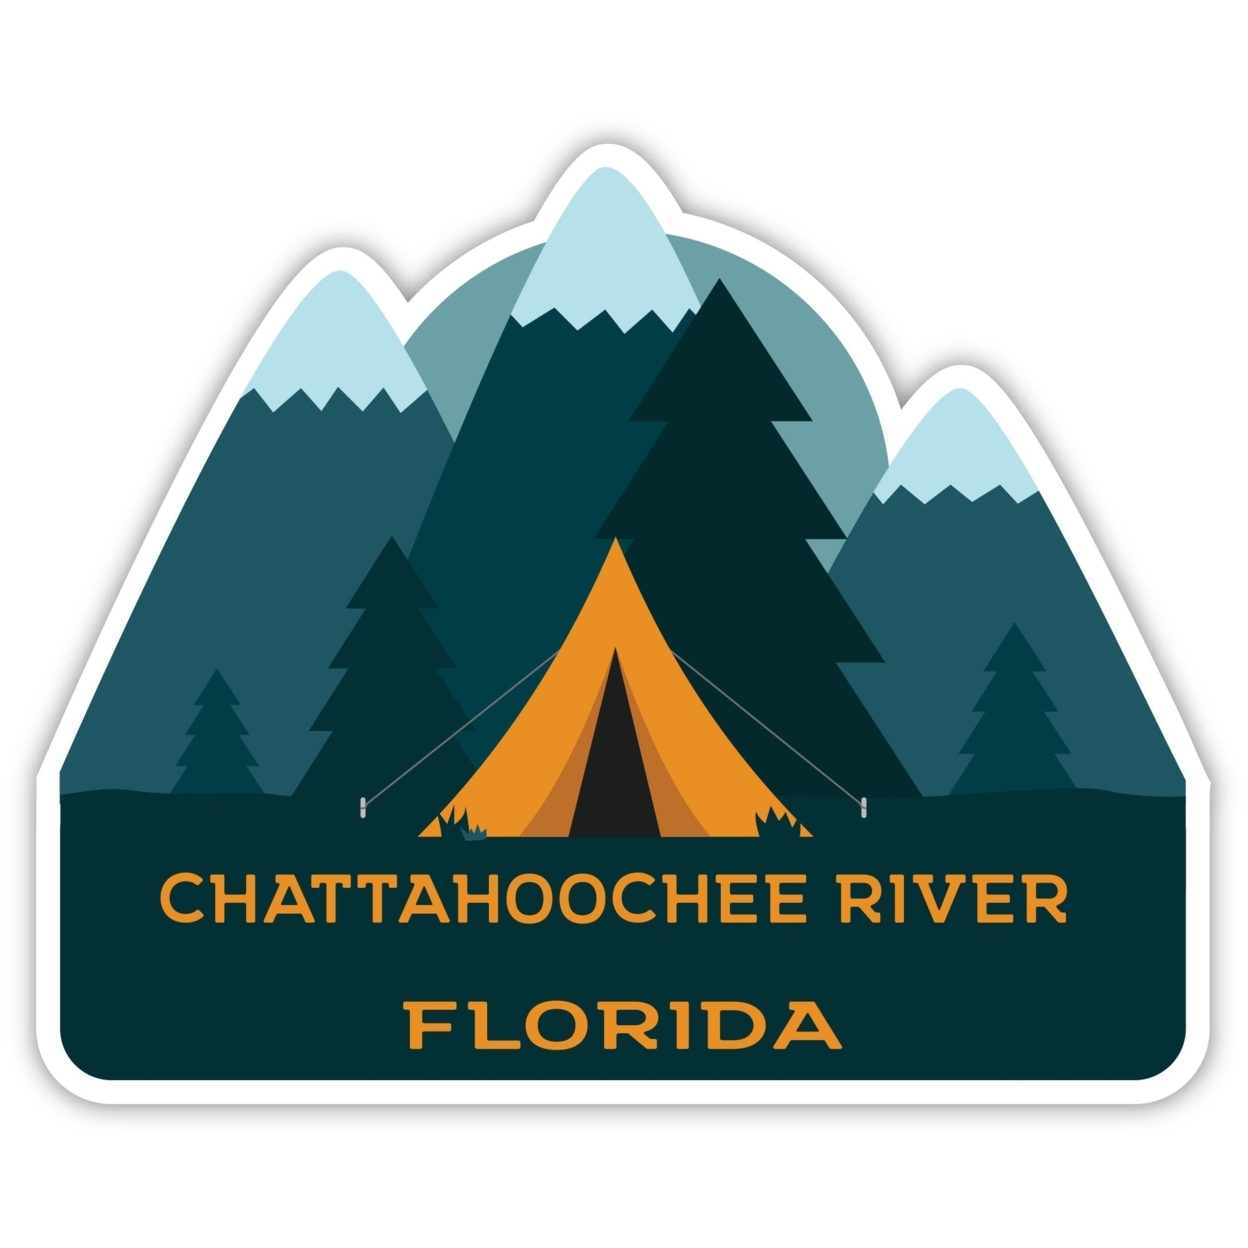 Chattahoochee River Florida Souvenir Decorative Stickers (Choose Theme And Size) - 4-Pack, 6-Inch, Tent